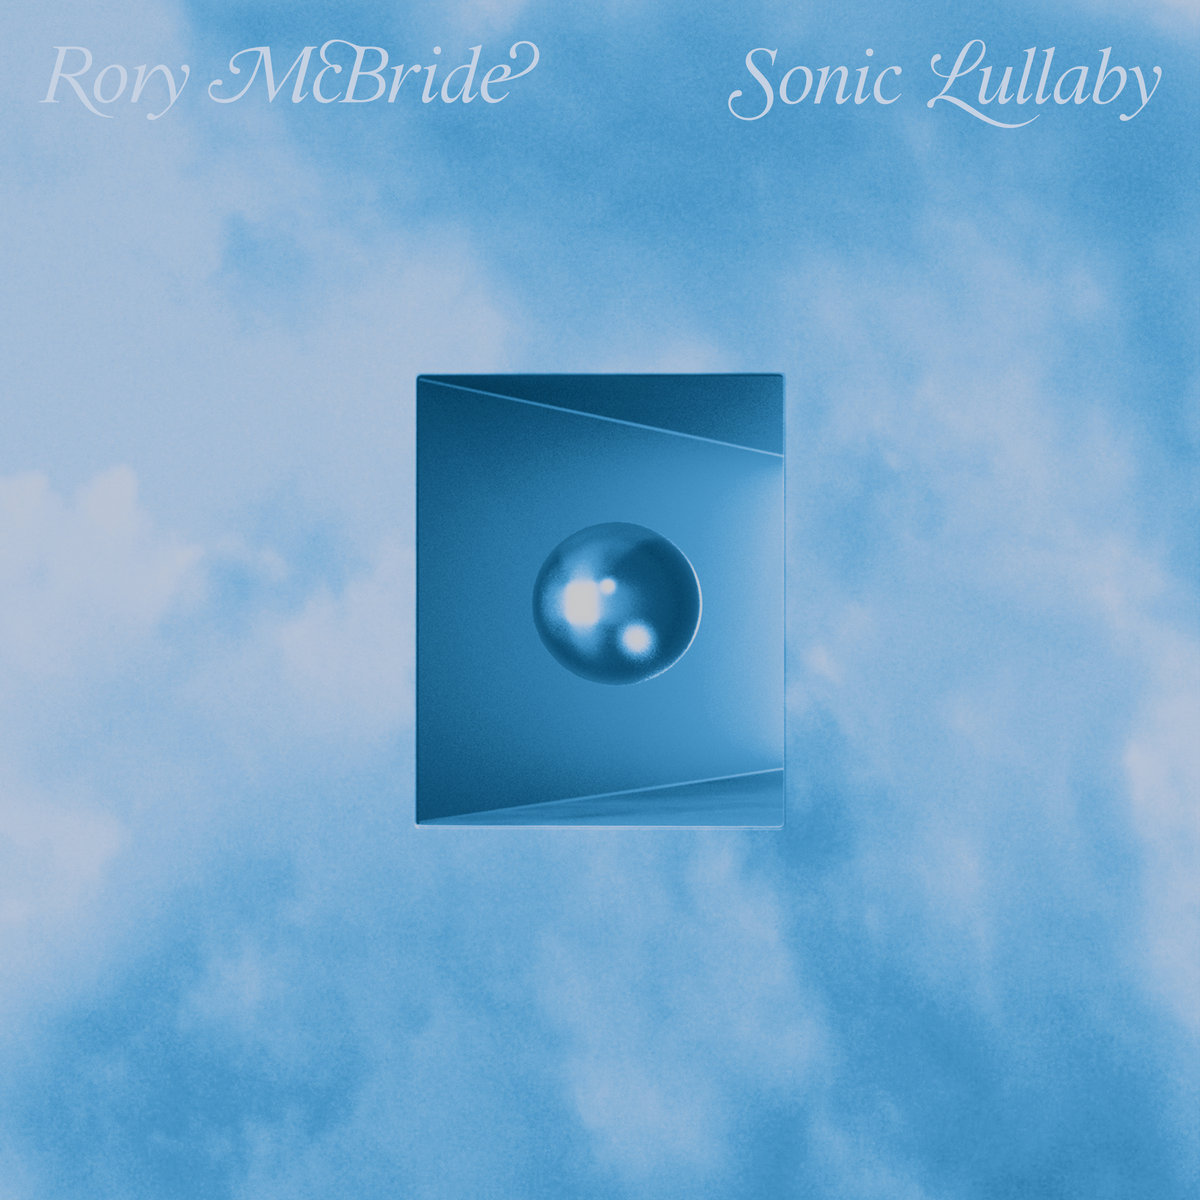 Check Out Acid Folk Poet Rory McBride’s EP, Sonic Lullaby